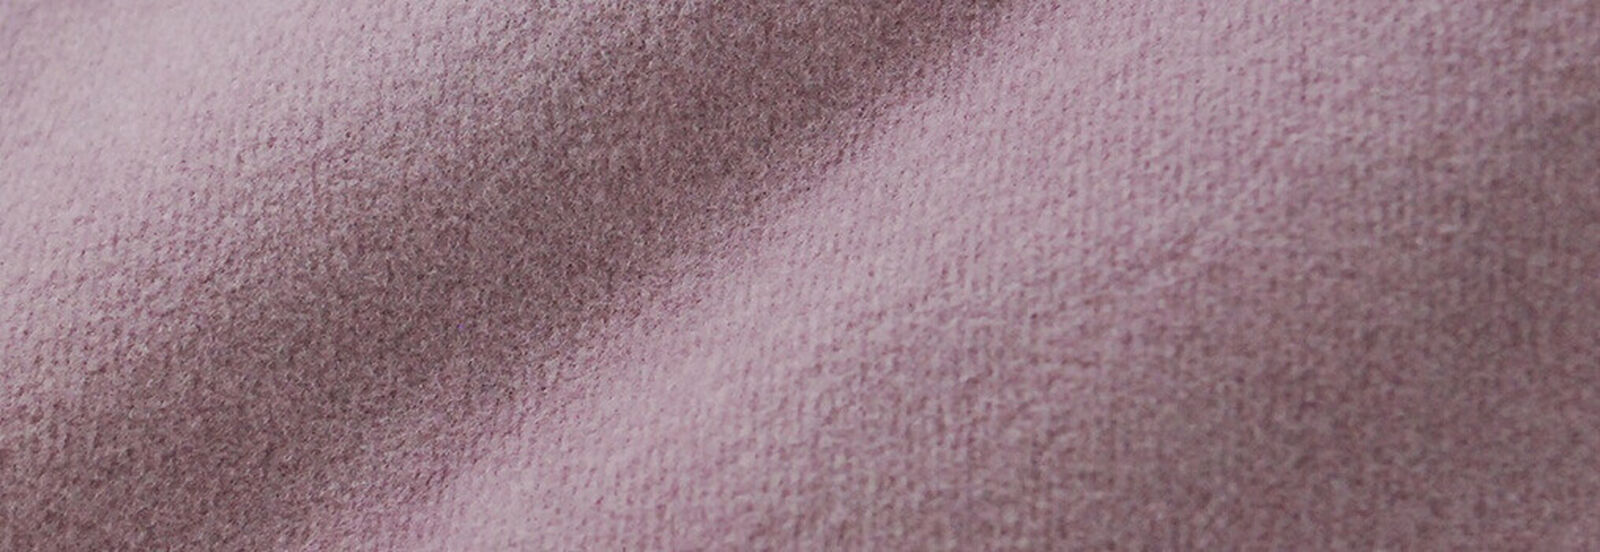 What is Moleskin? | Types of Cotton Fabric | Cotton